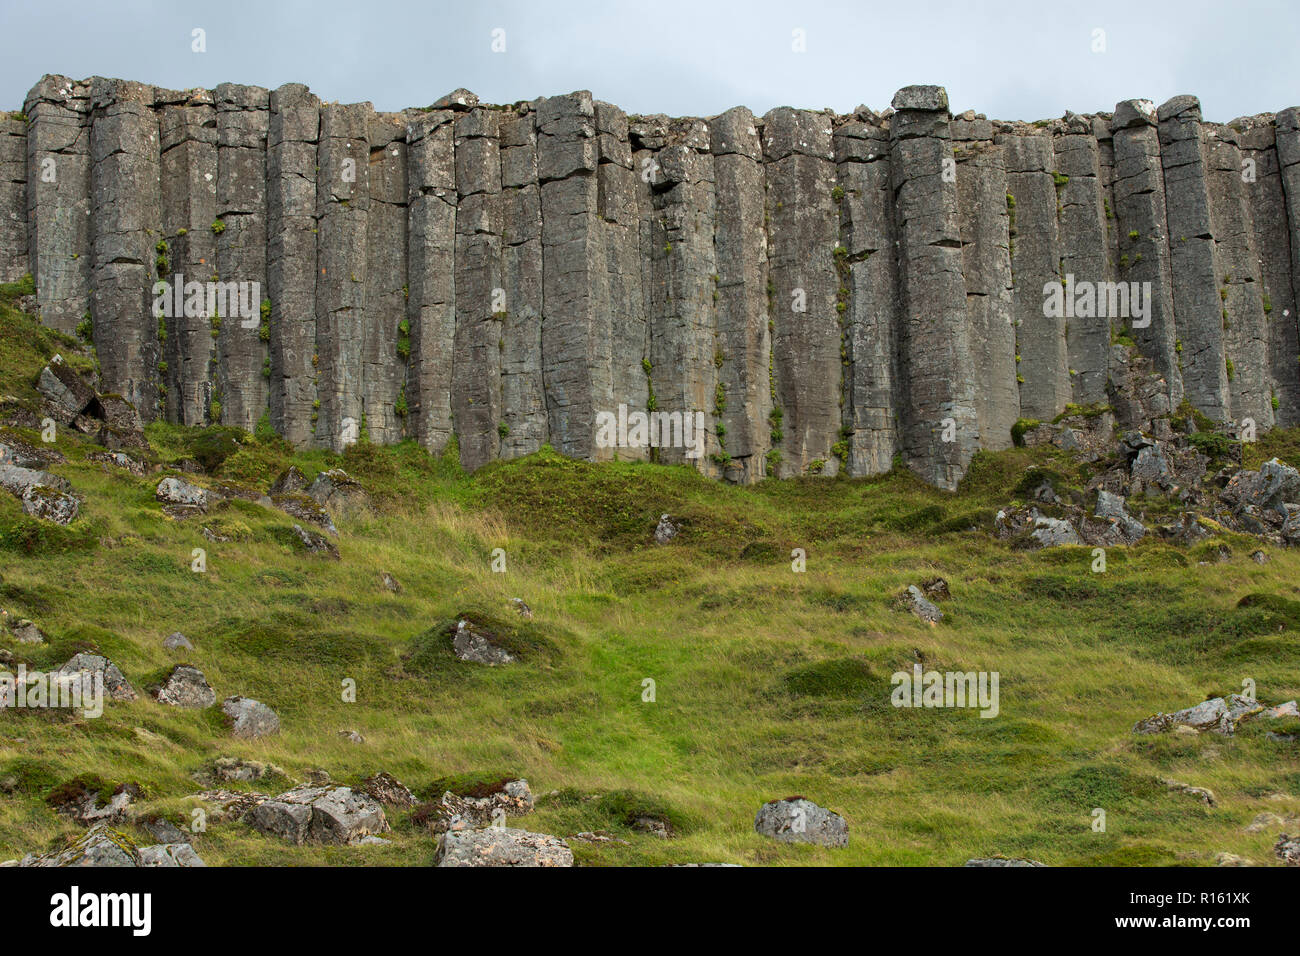 Wall of high basalt columns in Iceland. Volcanic Basalt Coloumn Formations. Stock Photo